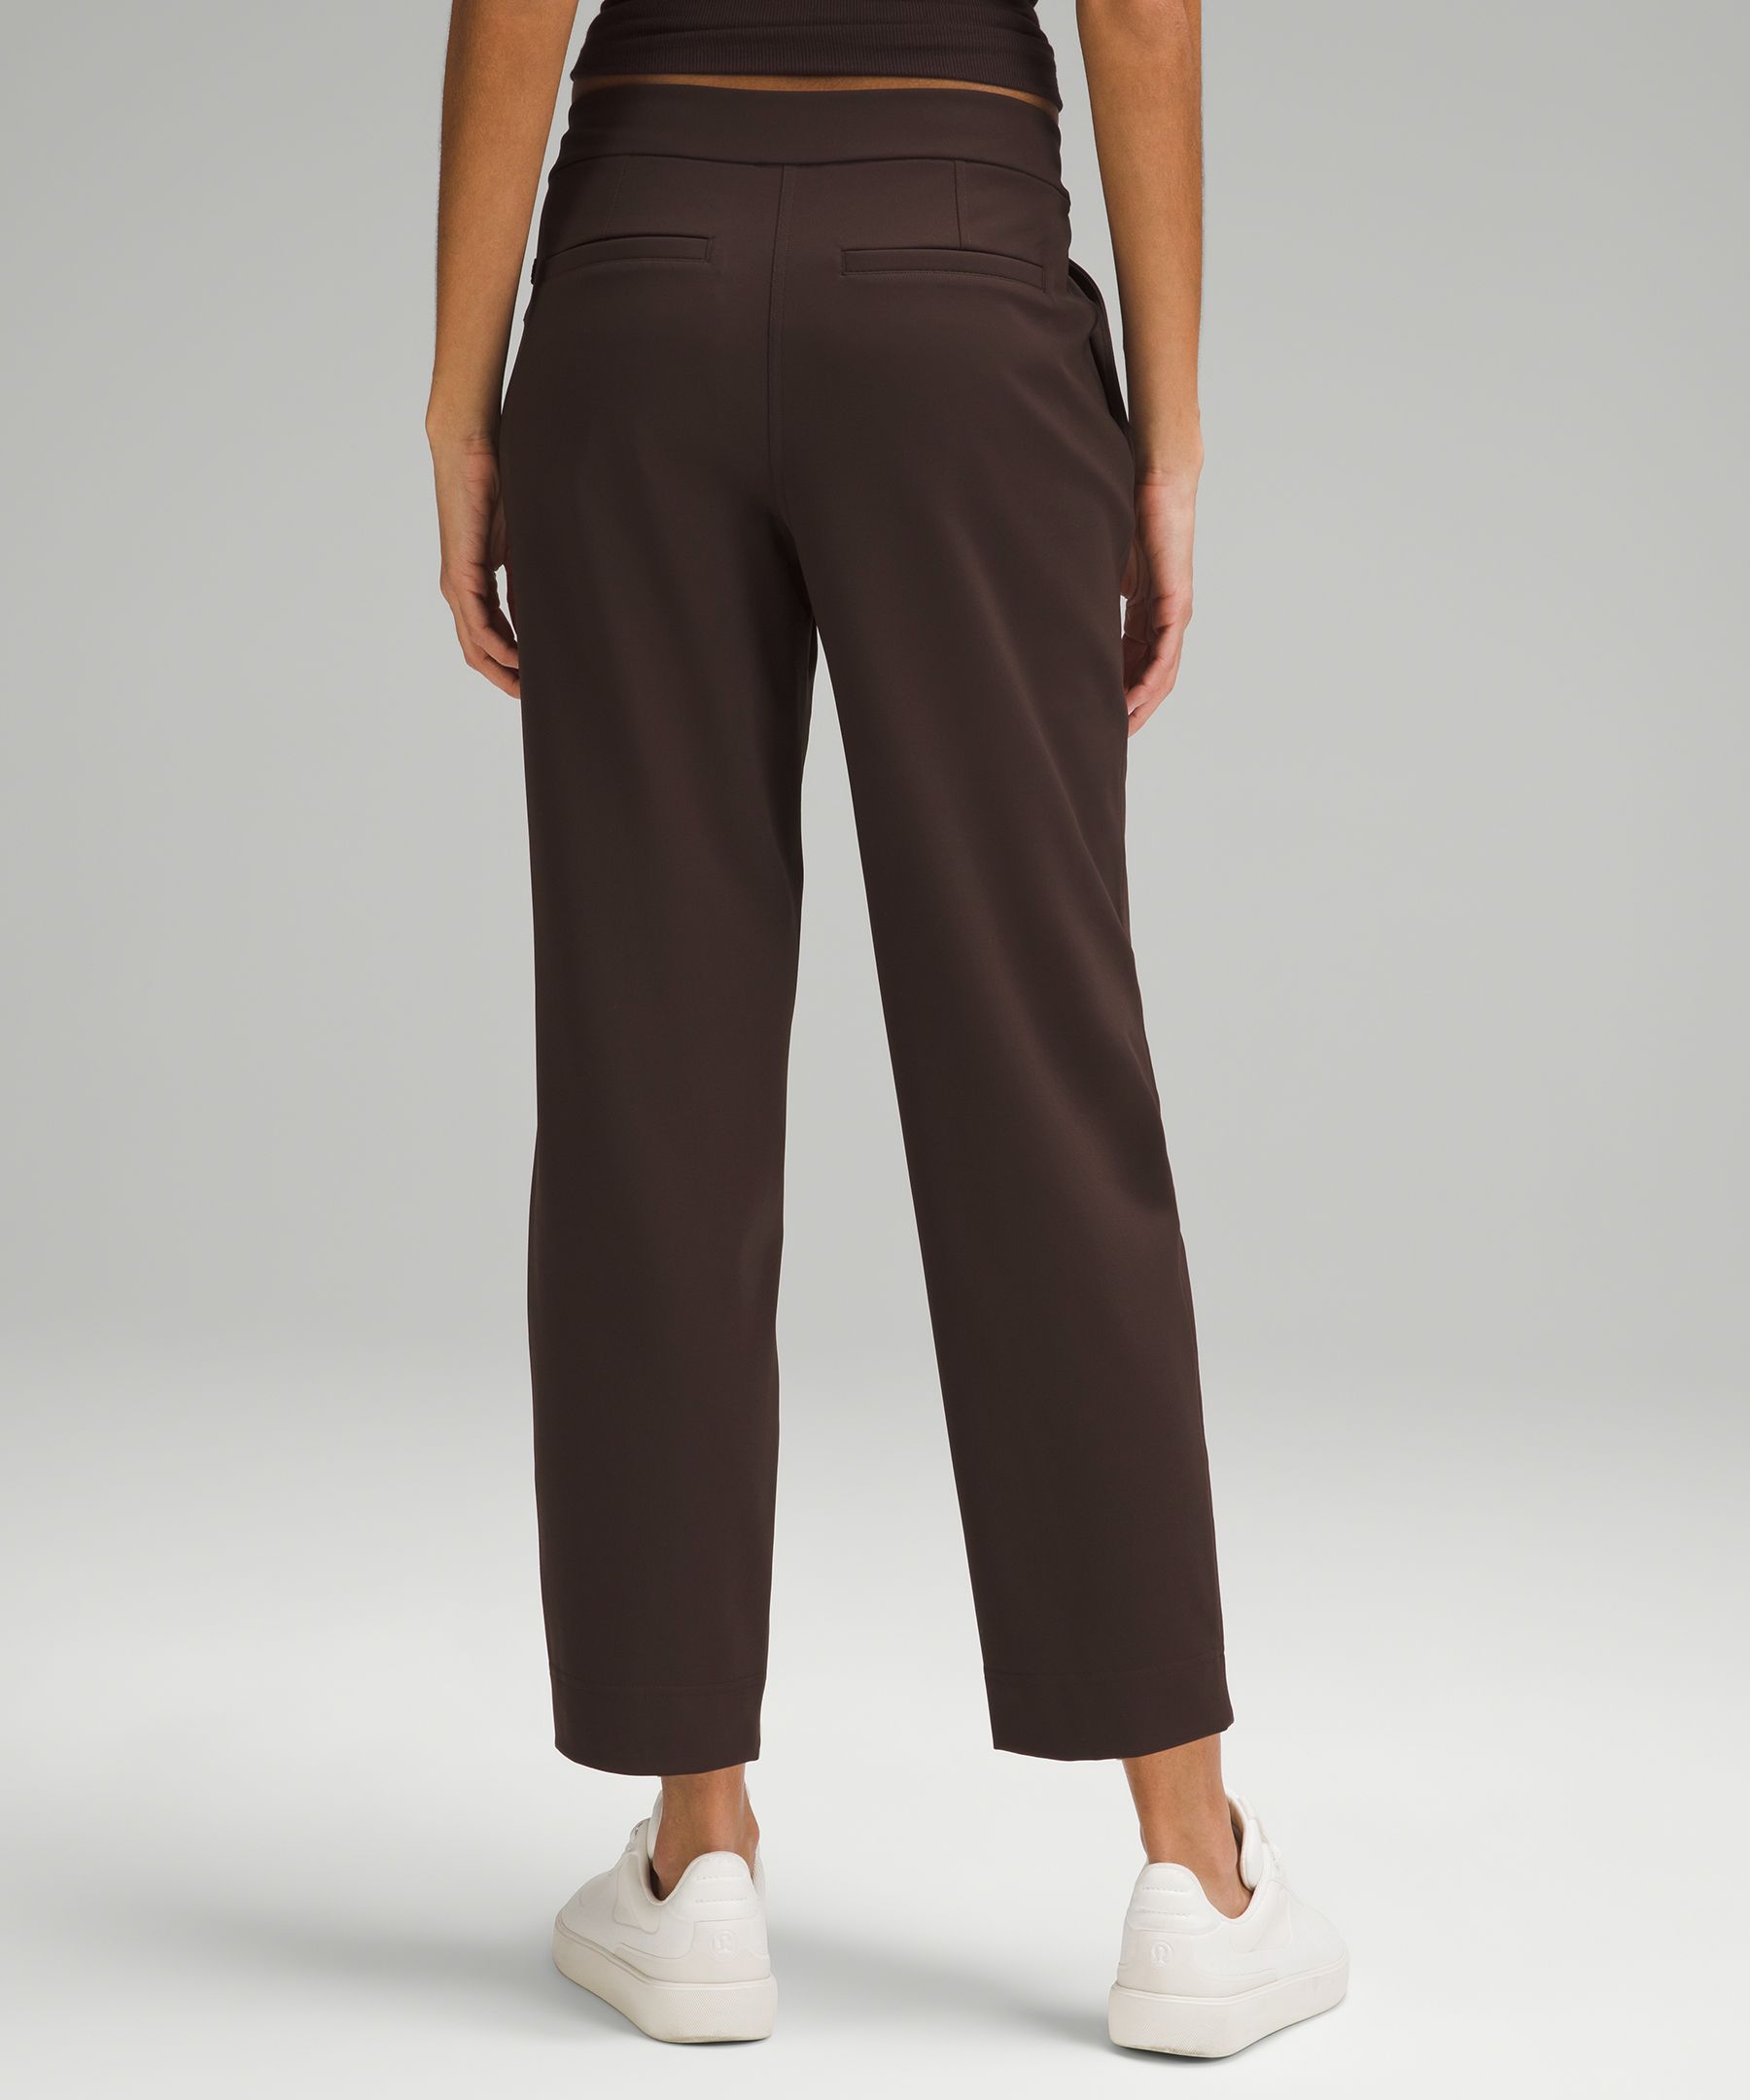 Tapered-Leg Mid-Rise 7/8 Pant *Luxtreme | Women's Trousers | lululemon